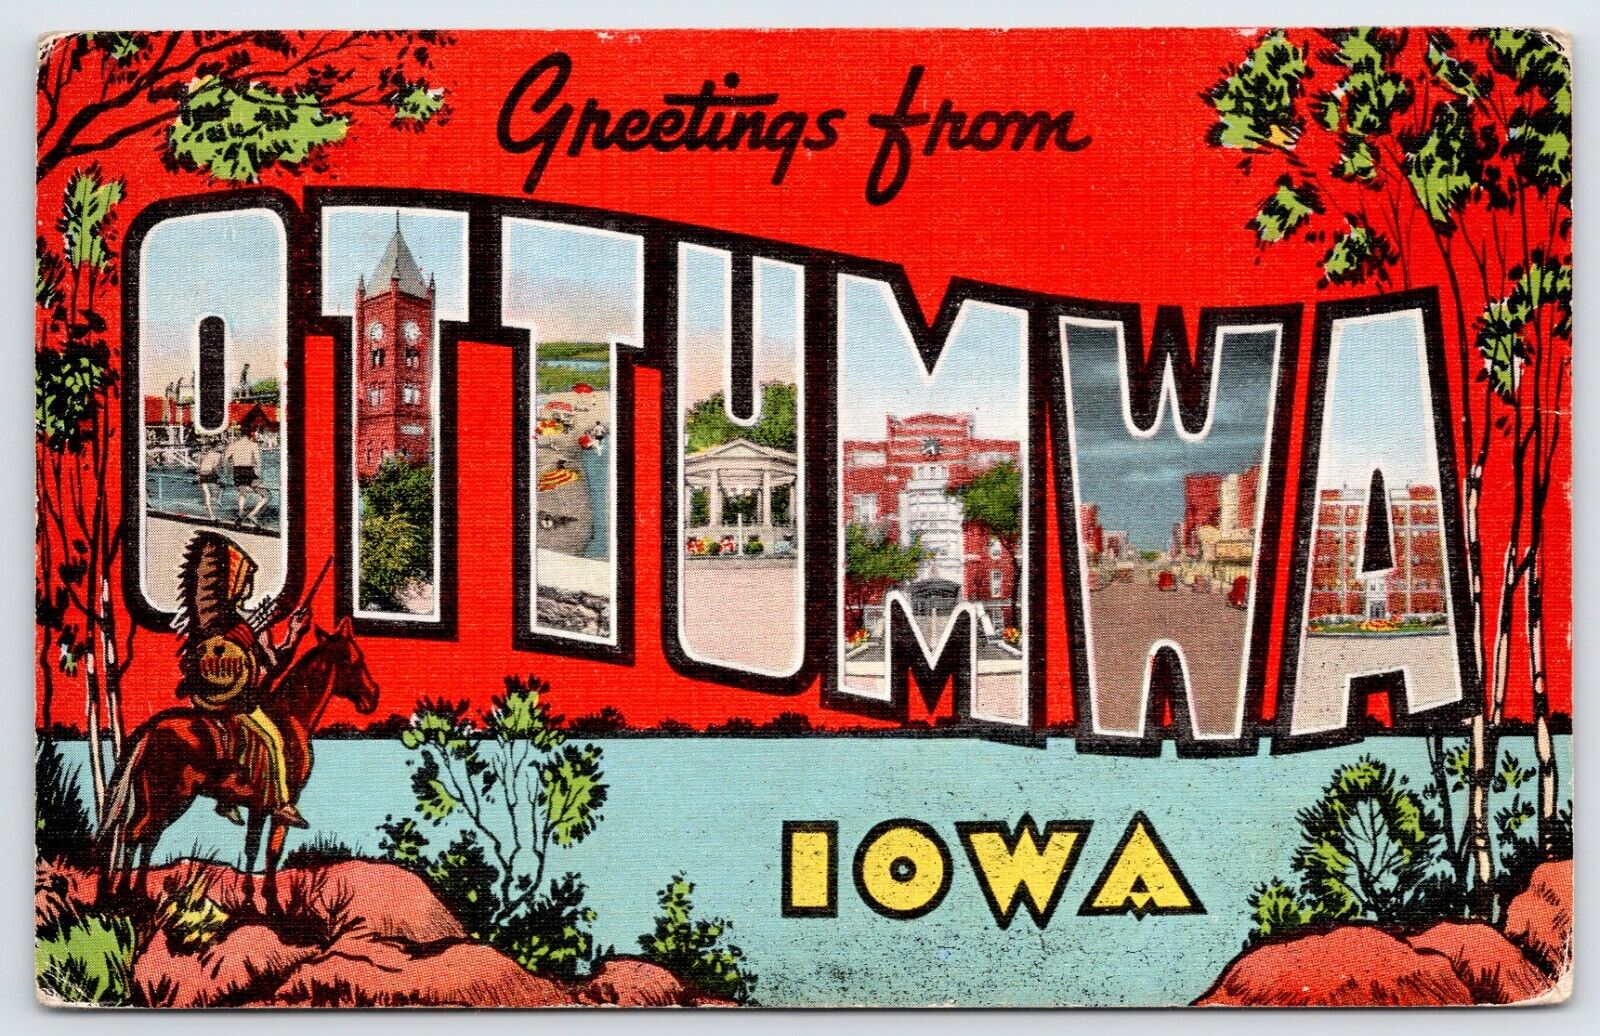 Postcard Greetings From Ottumwa, Large Letter Iowa Posted 1945